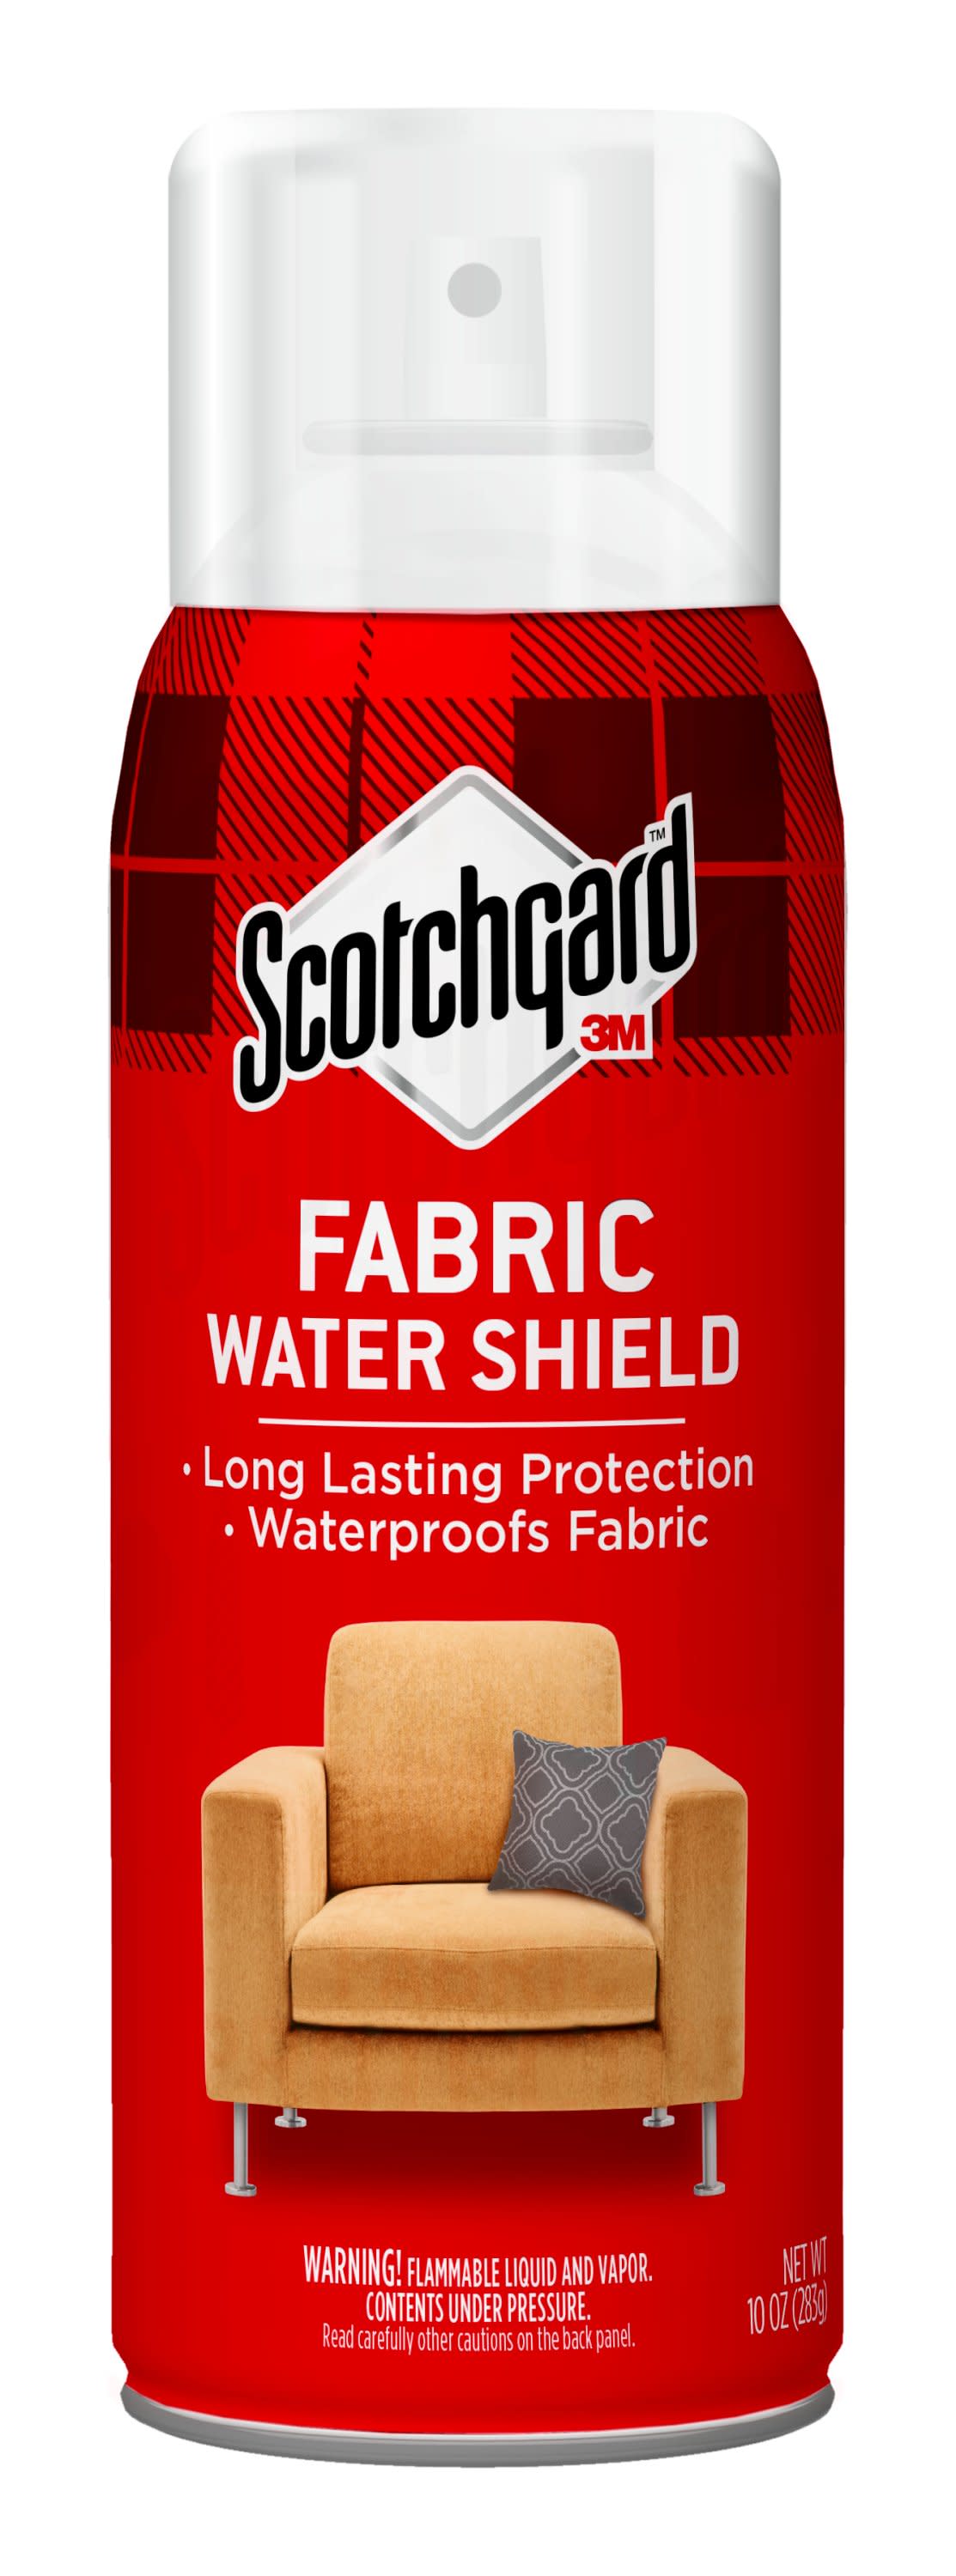 Scotchgard Fabric Water Shield Water Repellent Spray, One 10 oz Can - image 1 of 13